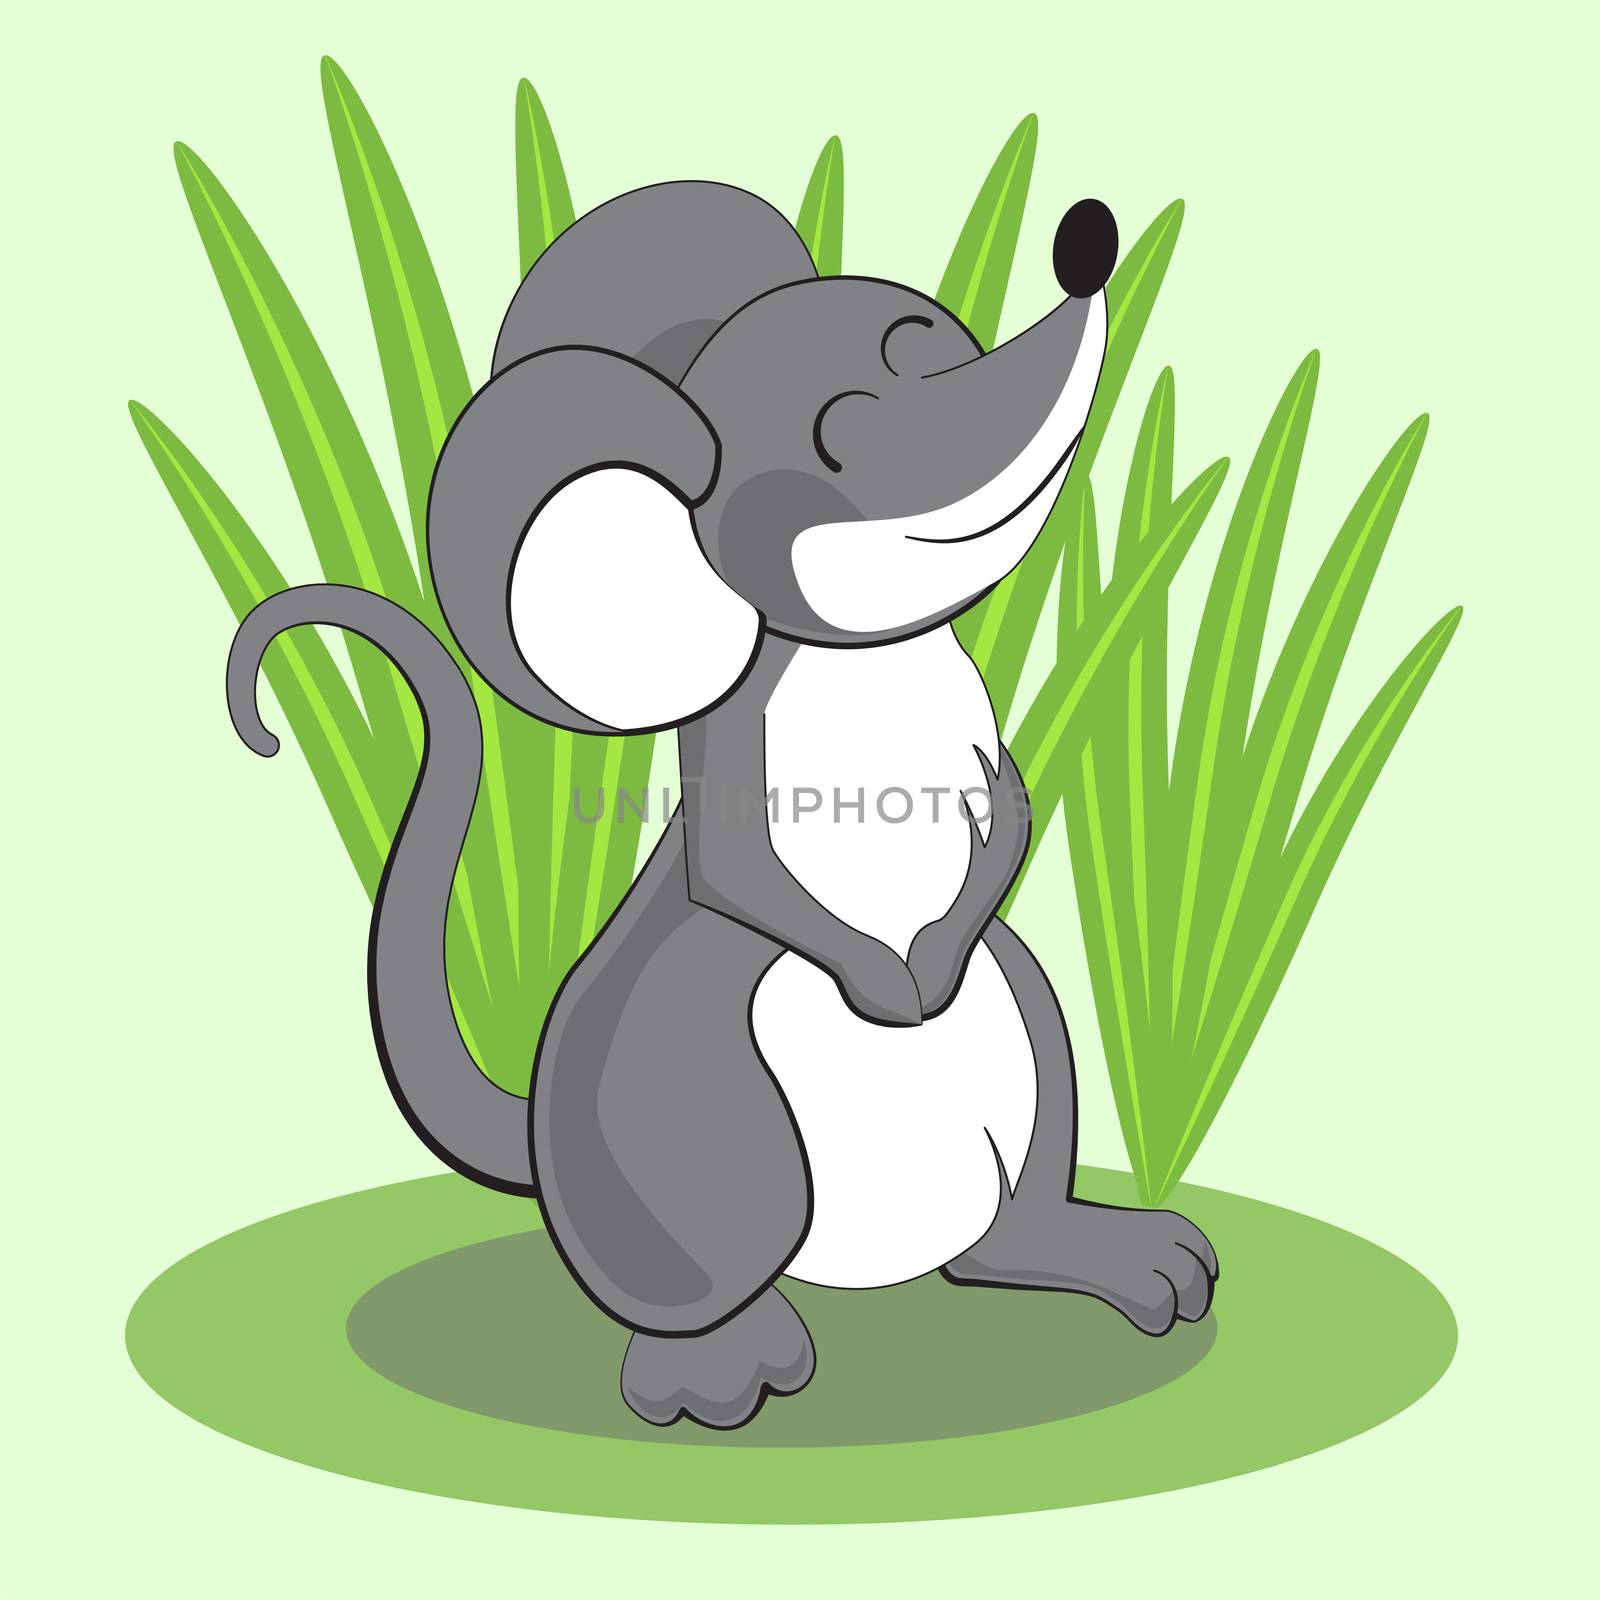 Beautiful cartoon mouse standing on grass and smiling. by Adamchuk